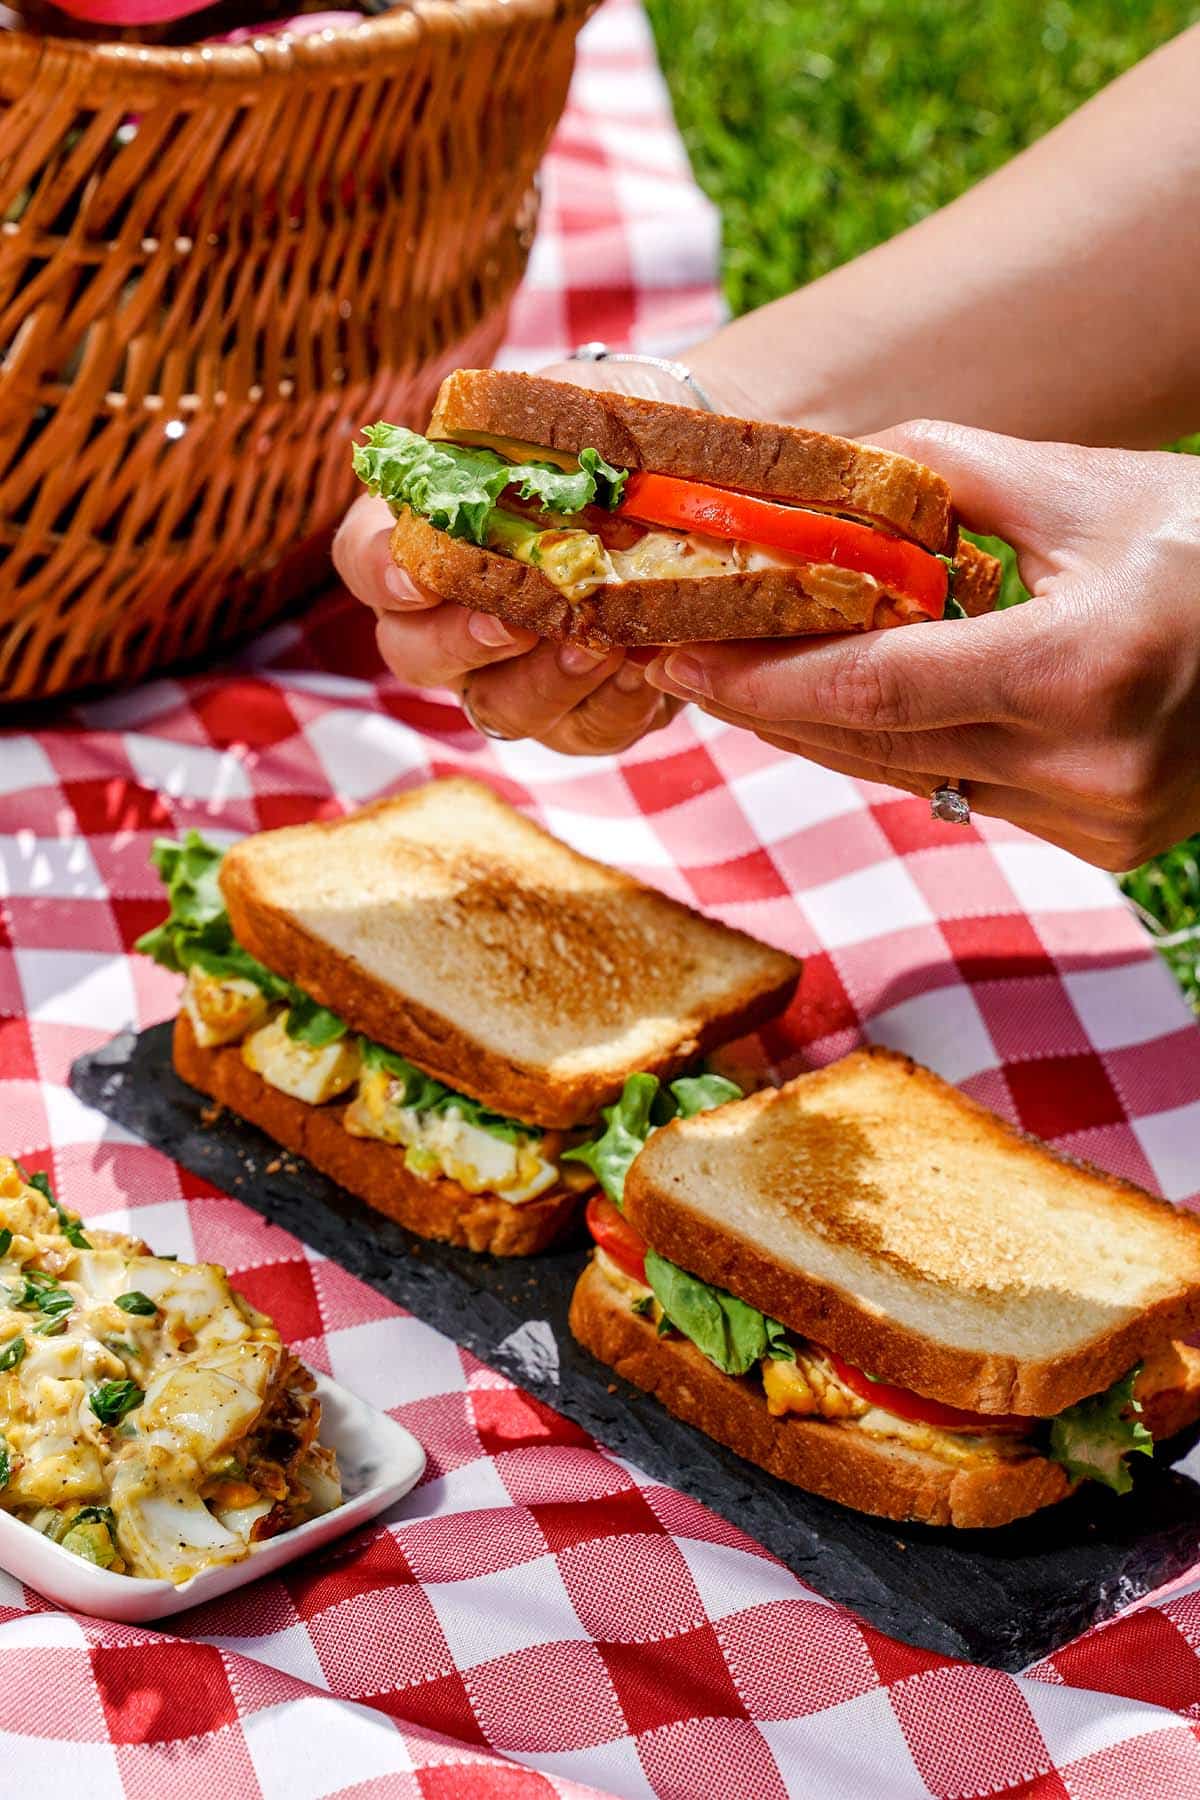 Holding Egg salad sandwich, with salad on plate to the side.